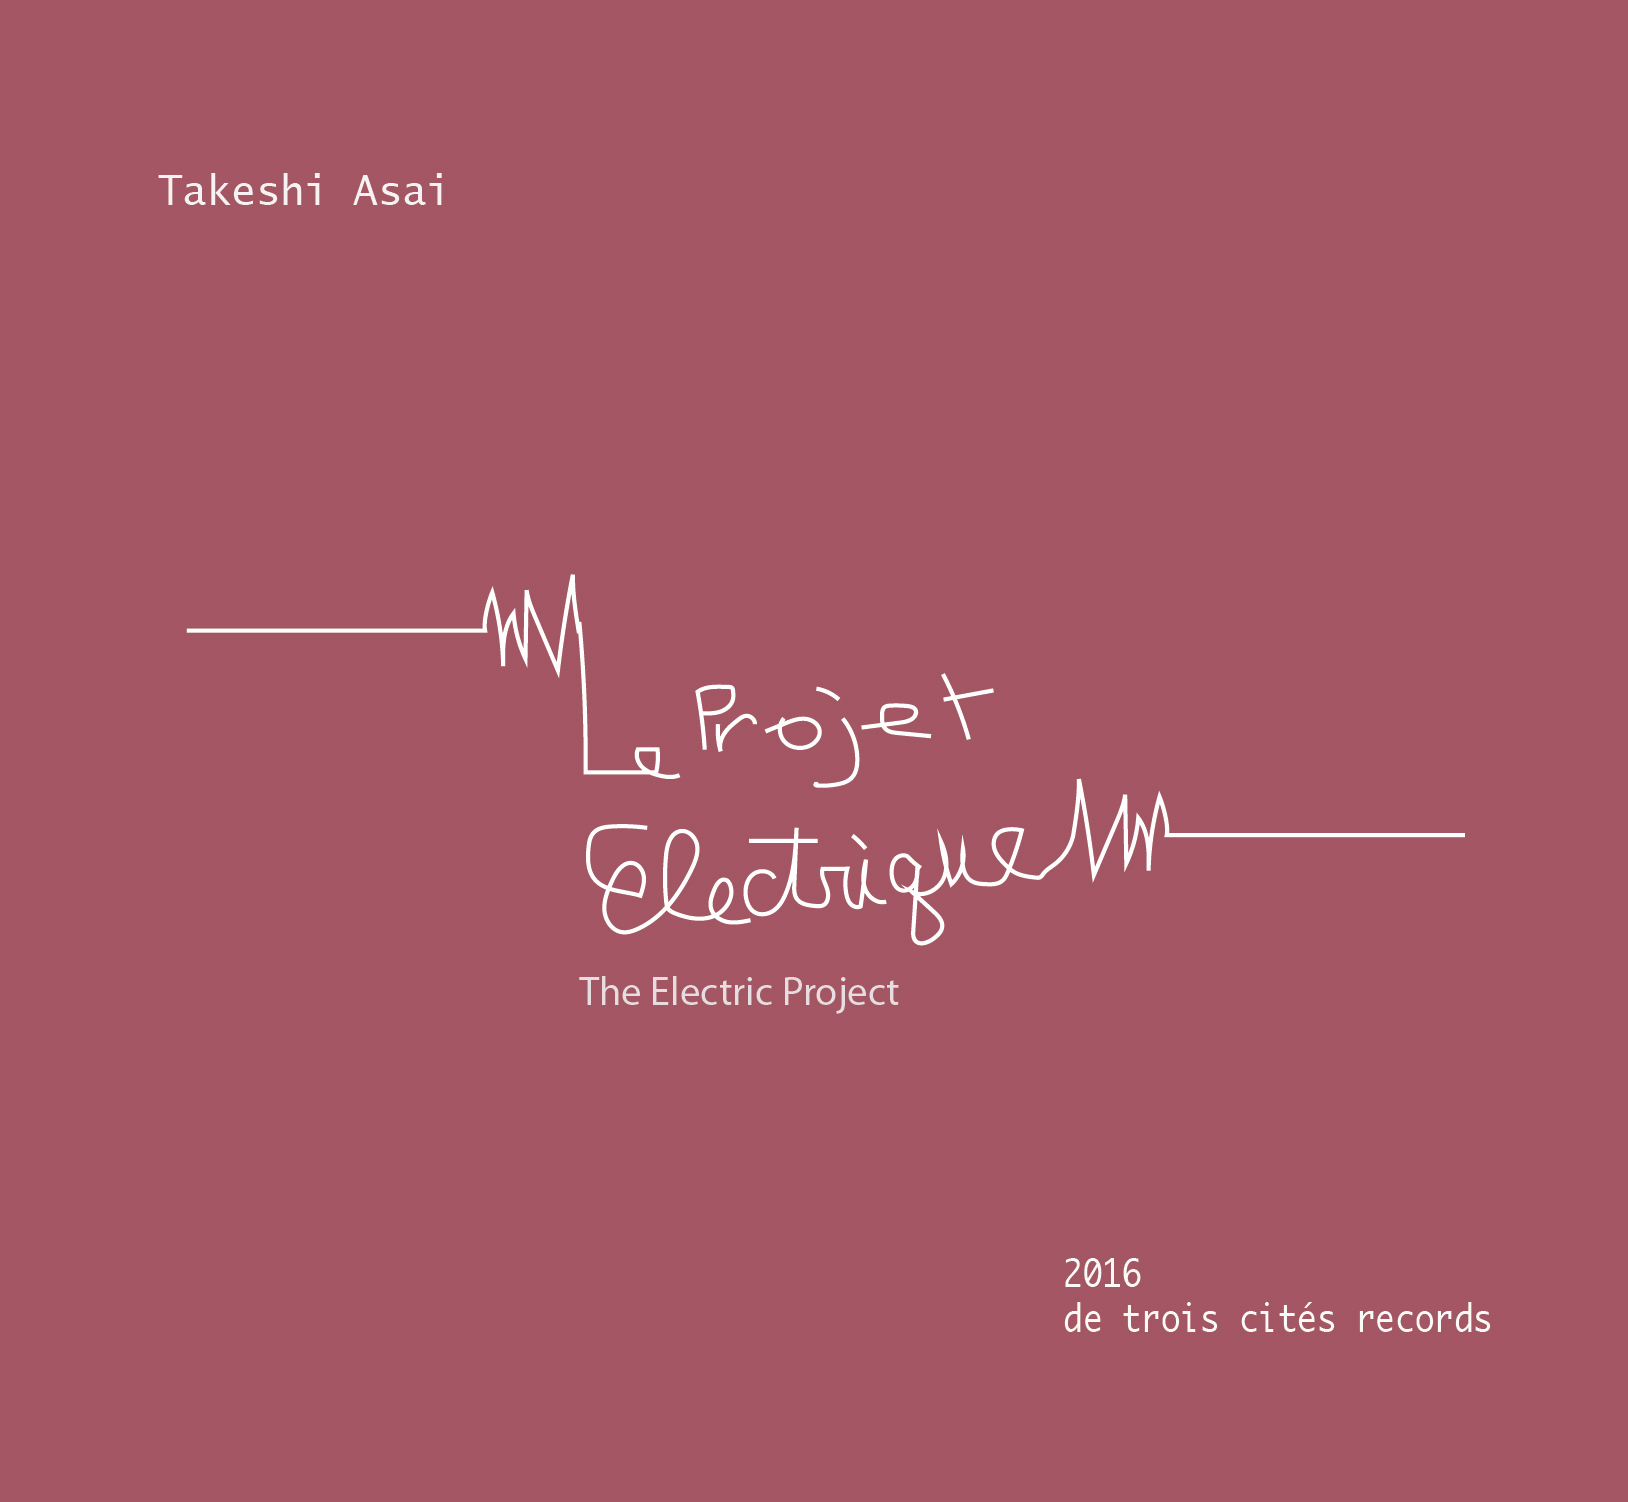 TAKESHI ASAI - Le Projet Electrique (The Electric Project) cover 